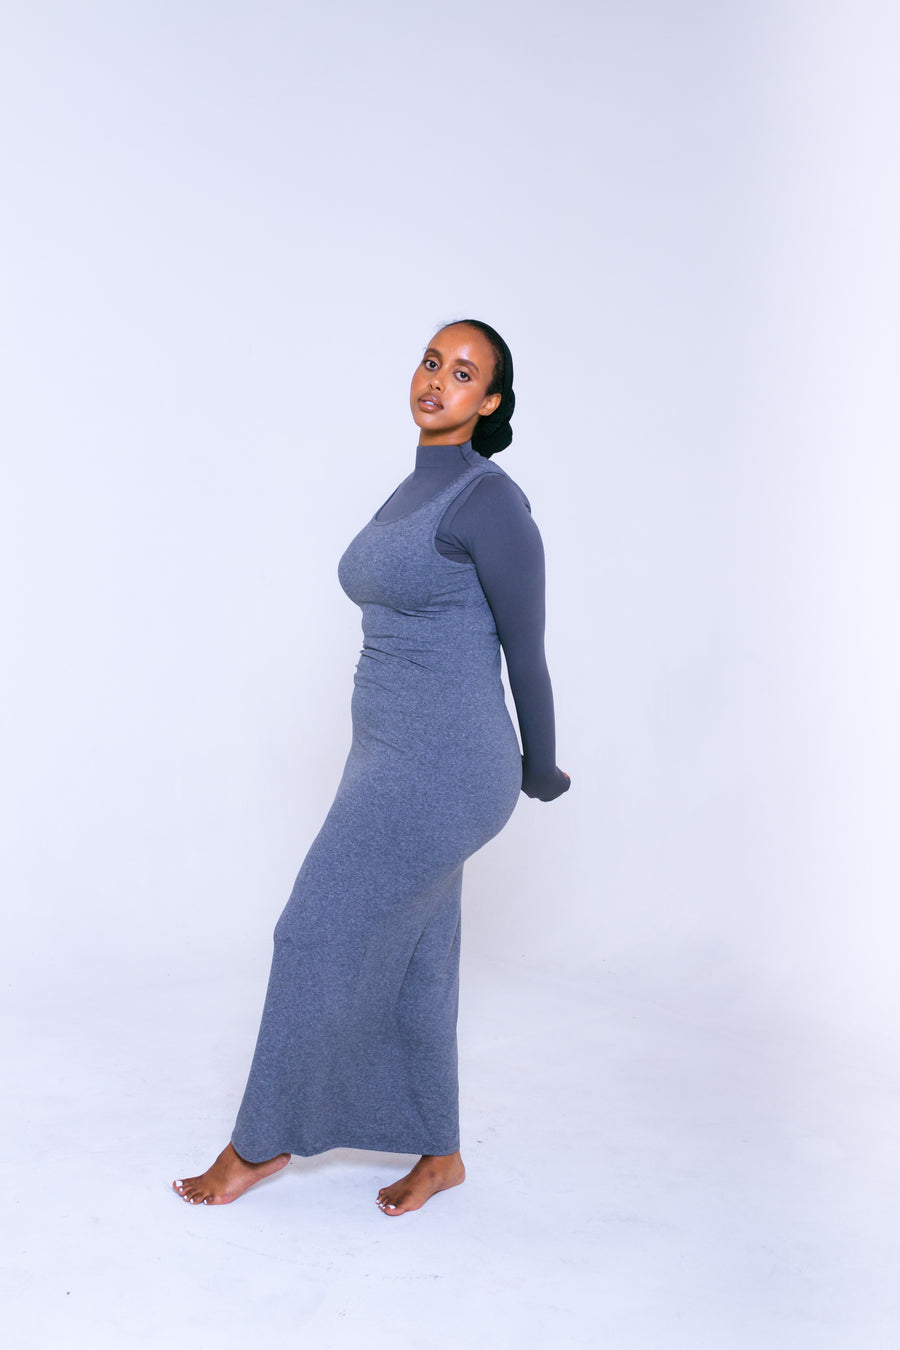 The Body Dress ‘Pepper Gray’ (fits up to Plus)